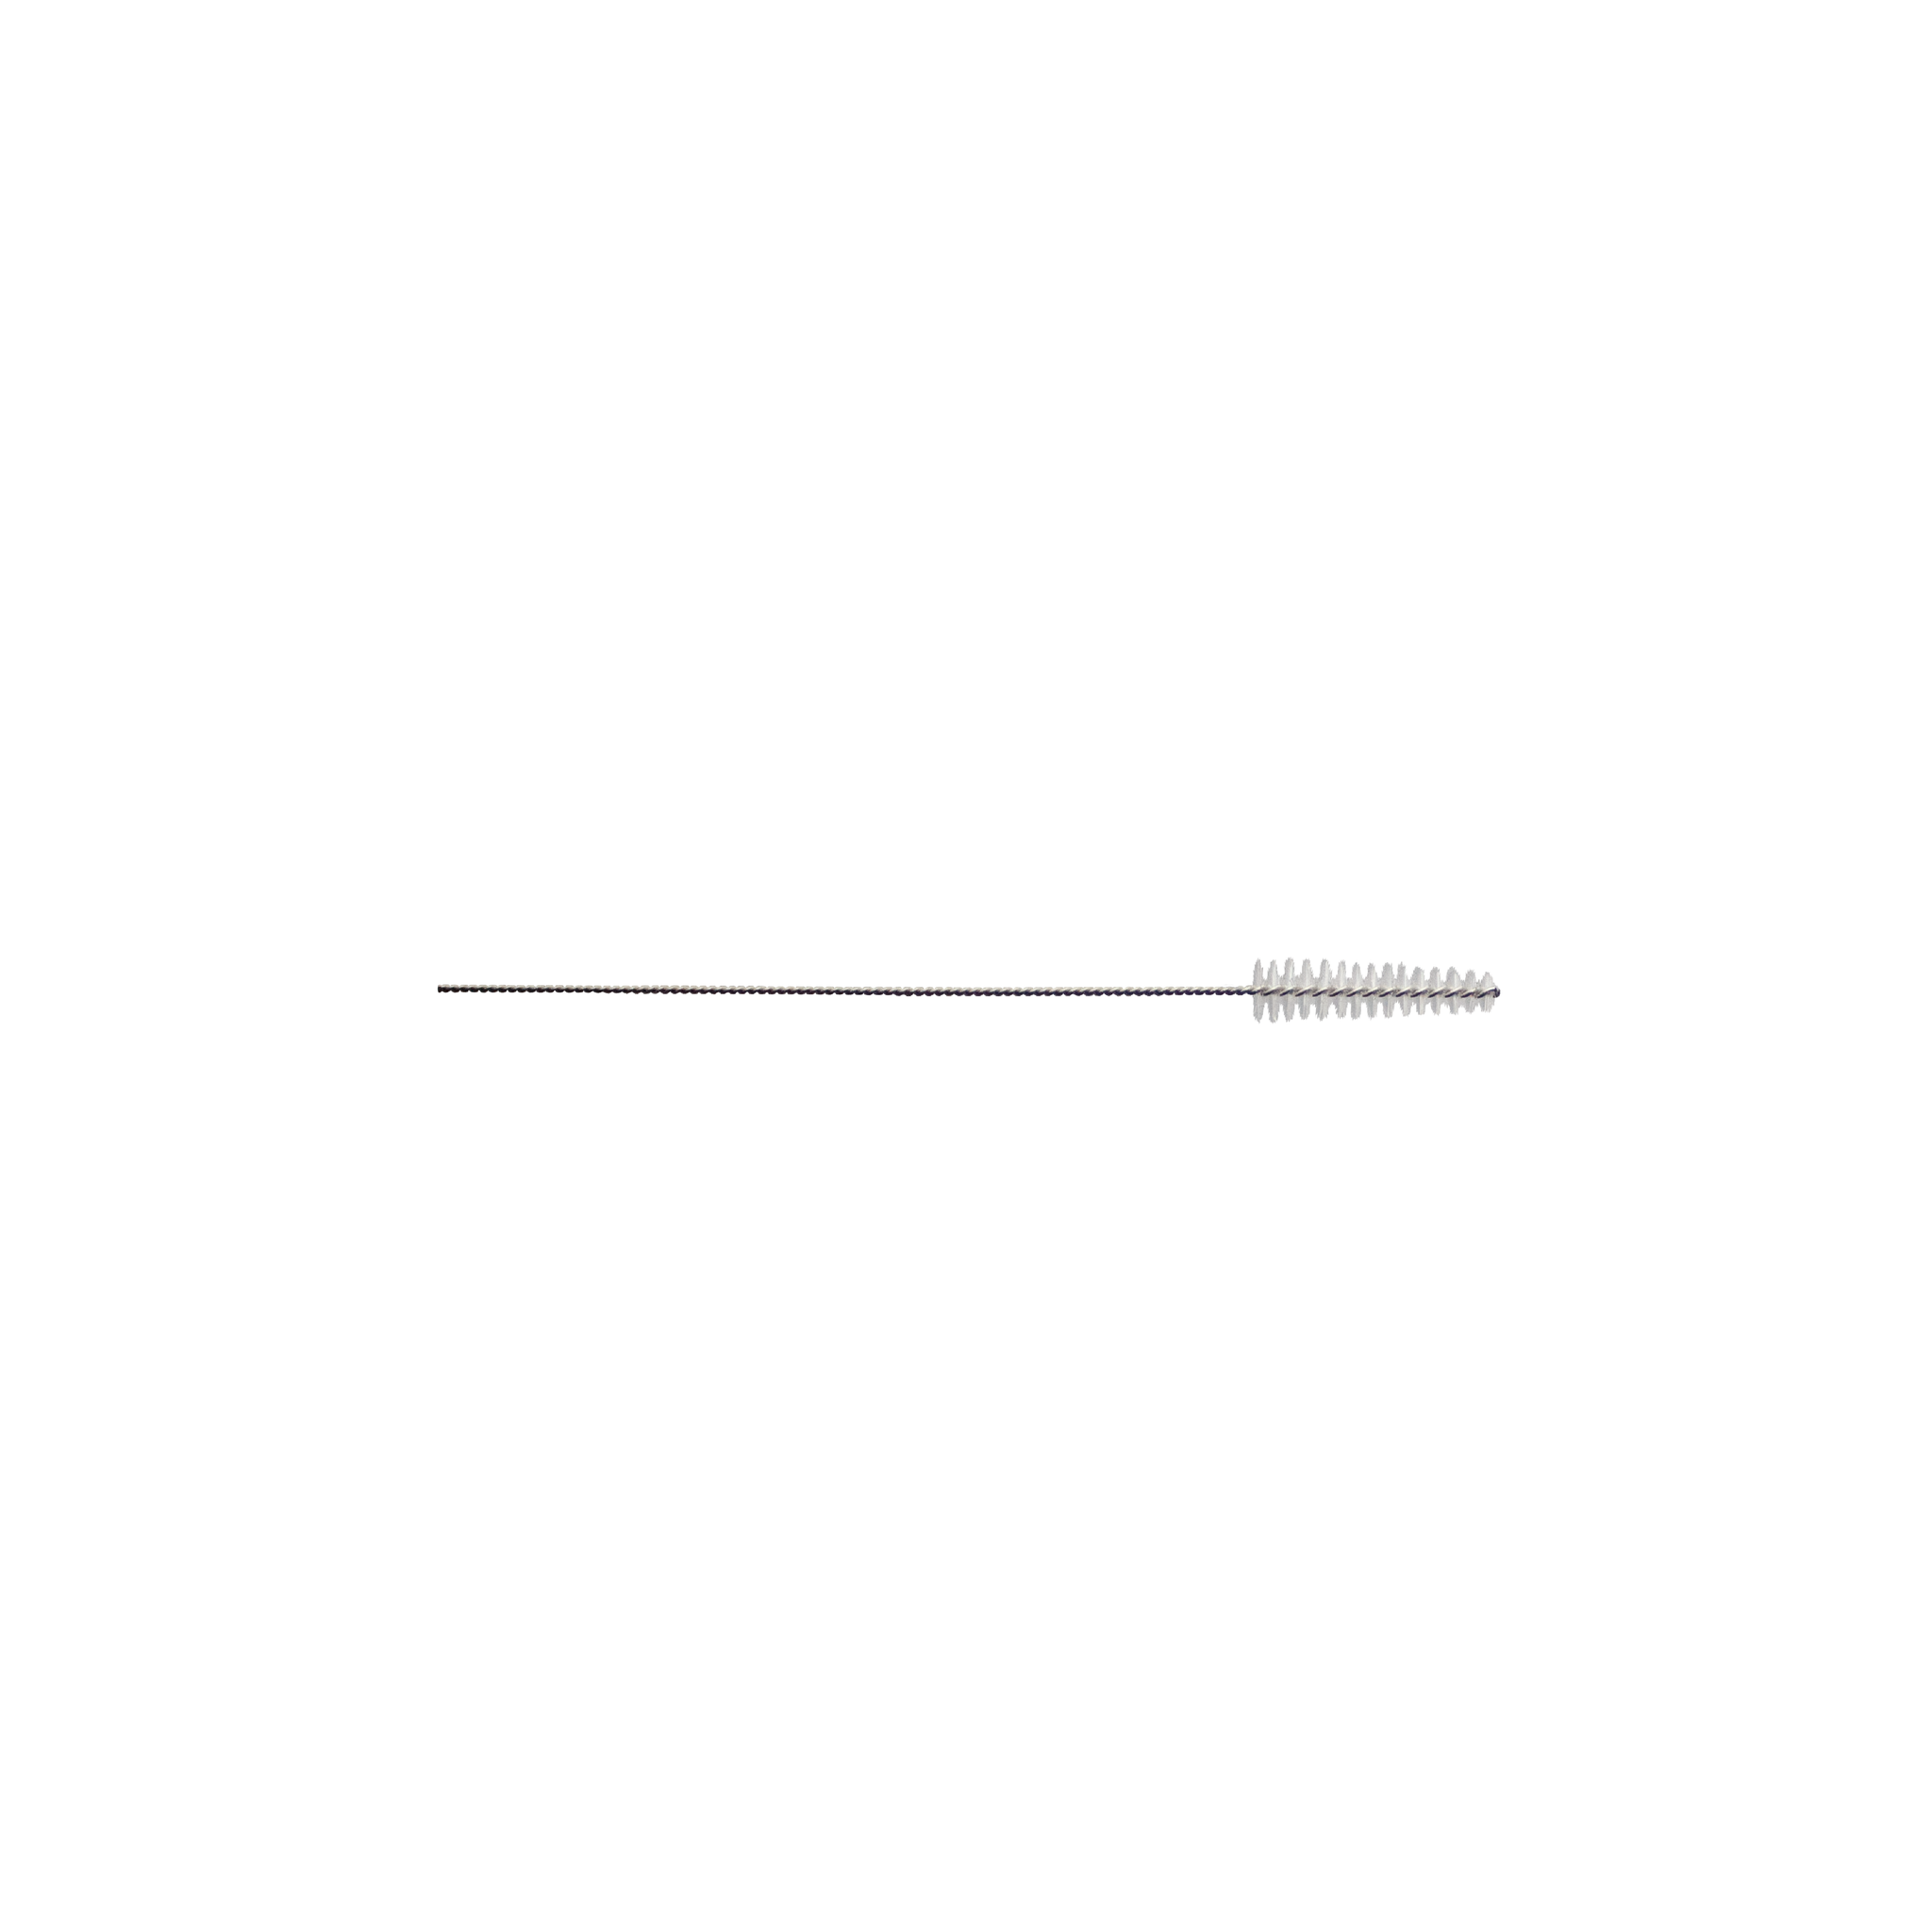 A singular silver S (second smallest size) interproximal brush shown horizontally on a white background.